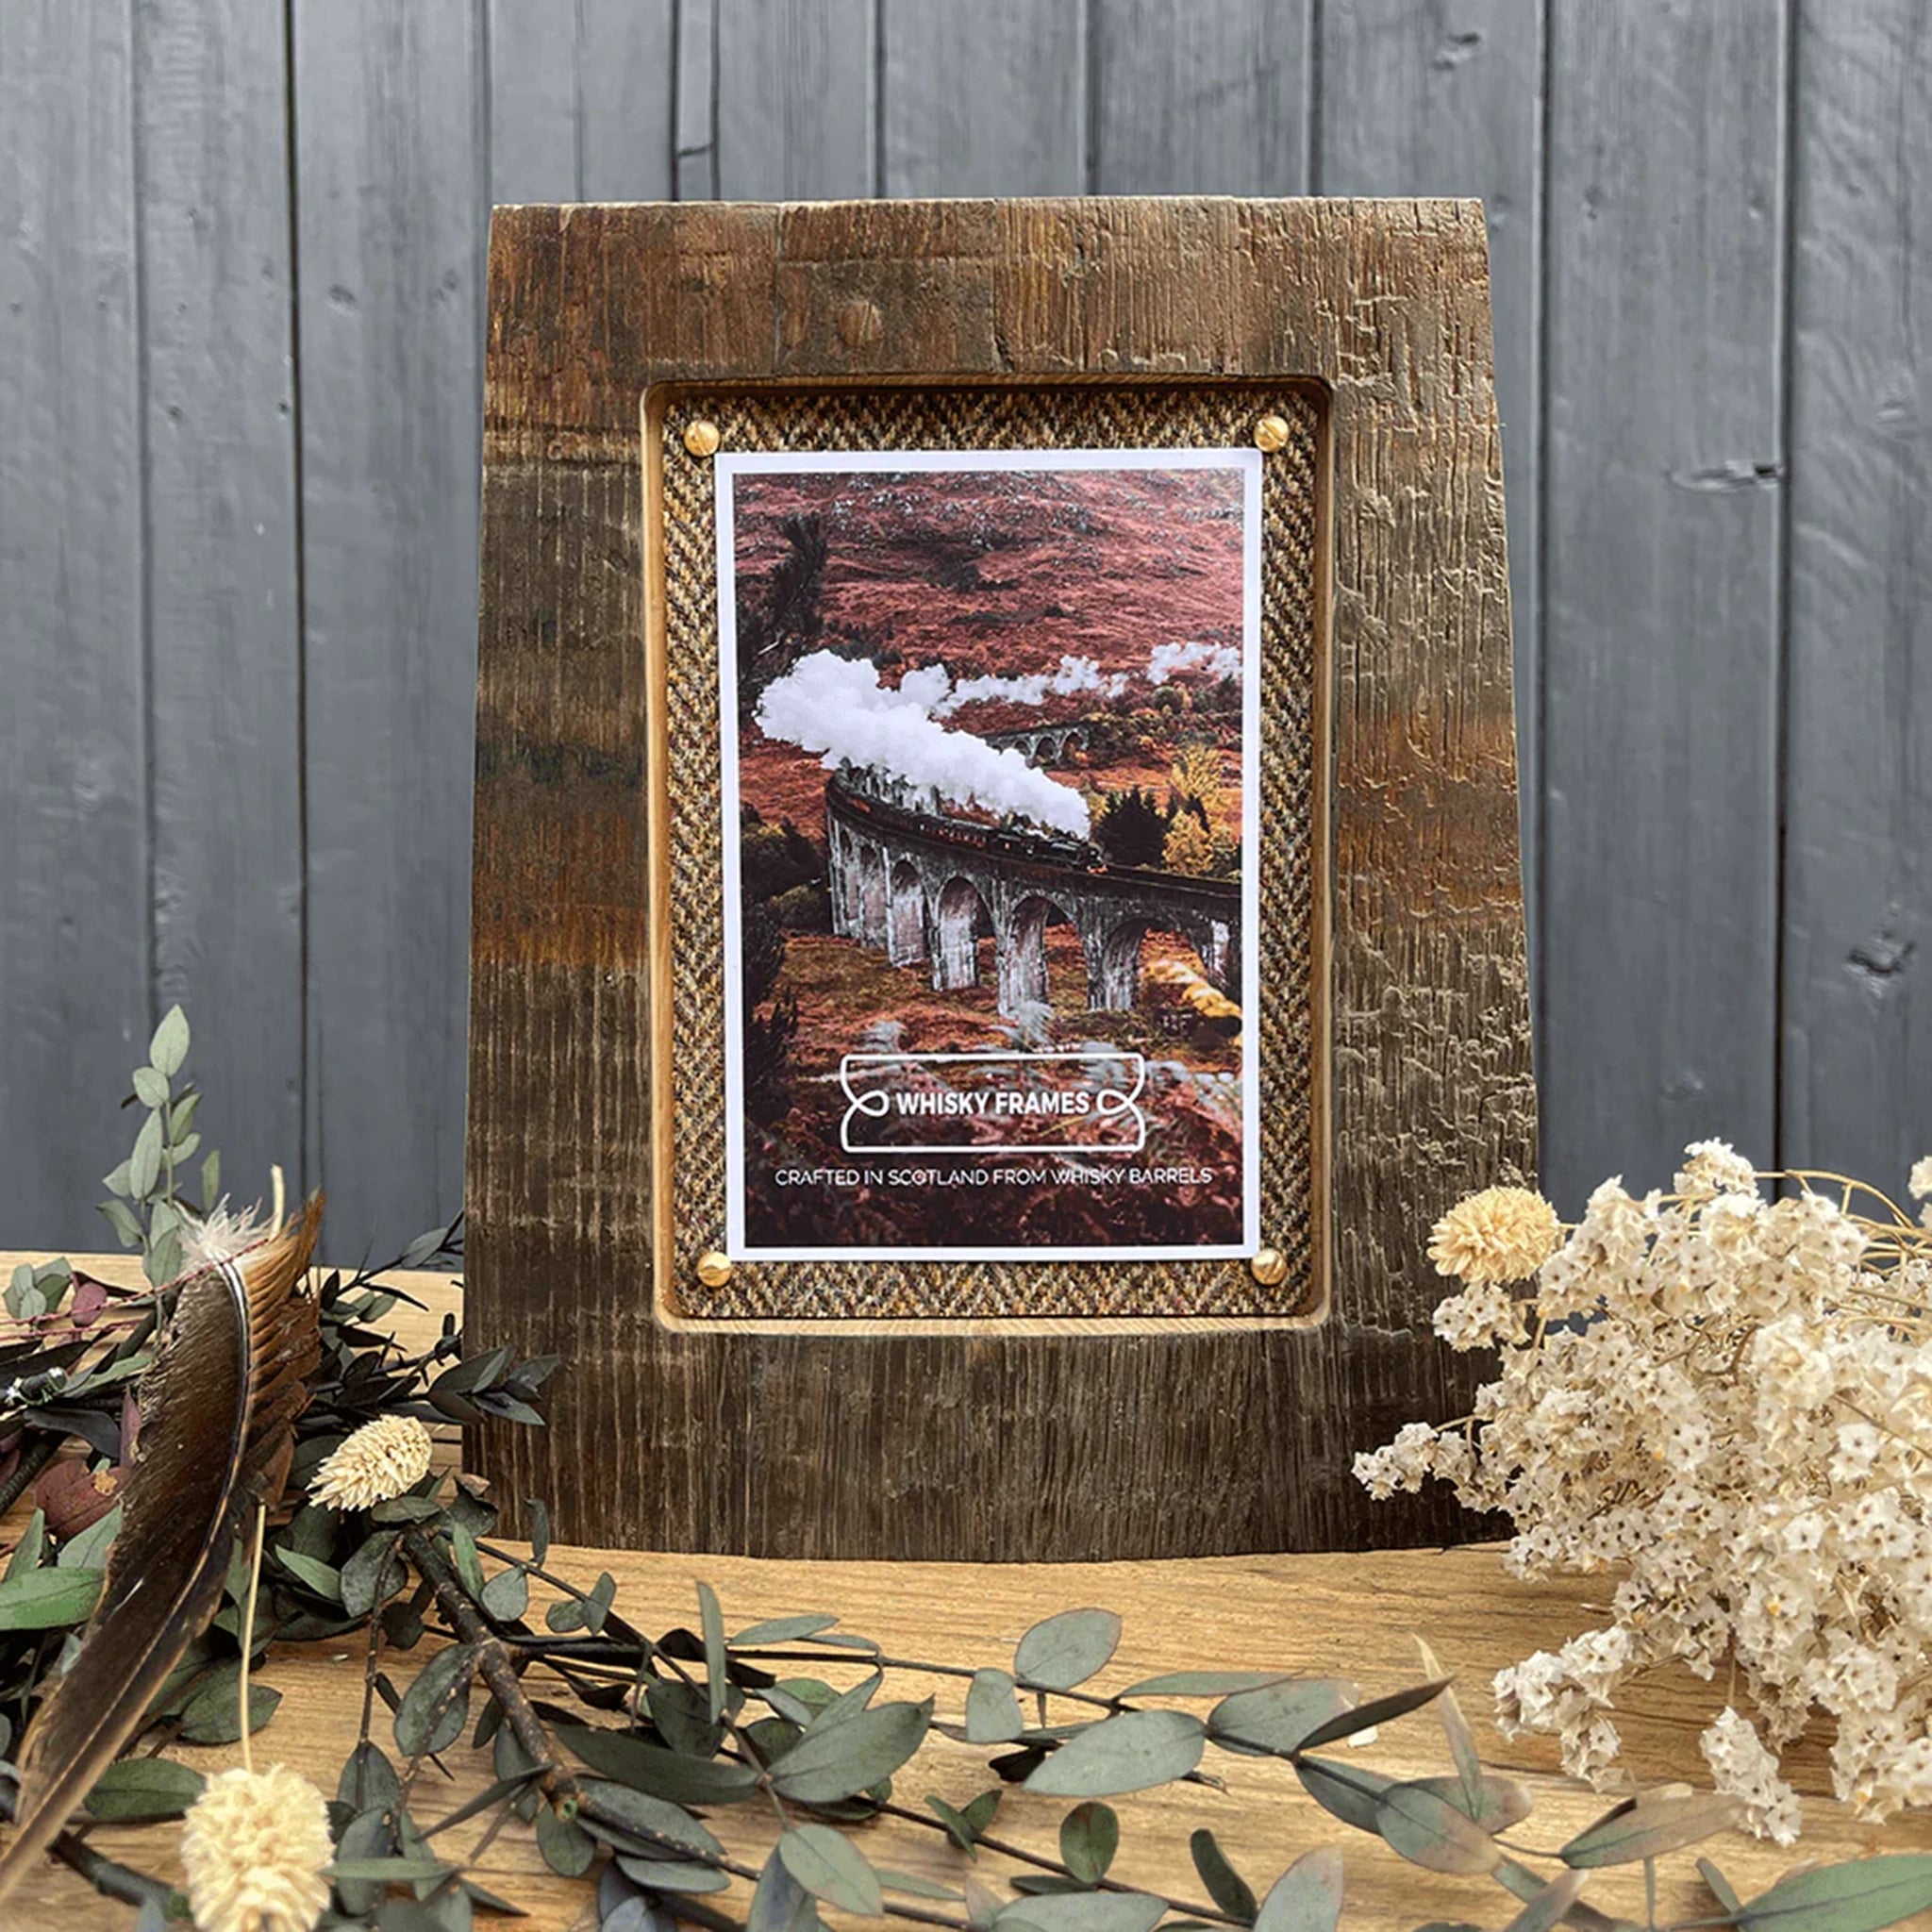 A frame made with whisky barrel wood and Harris Tweed lifestyle